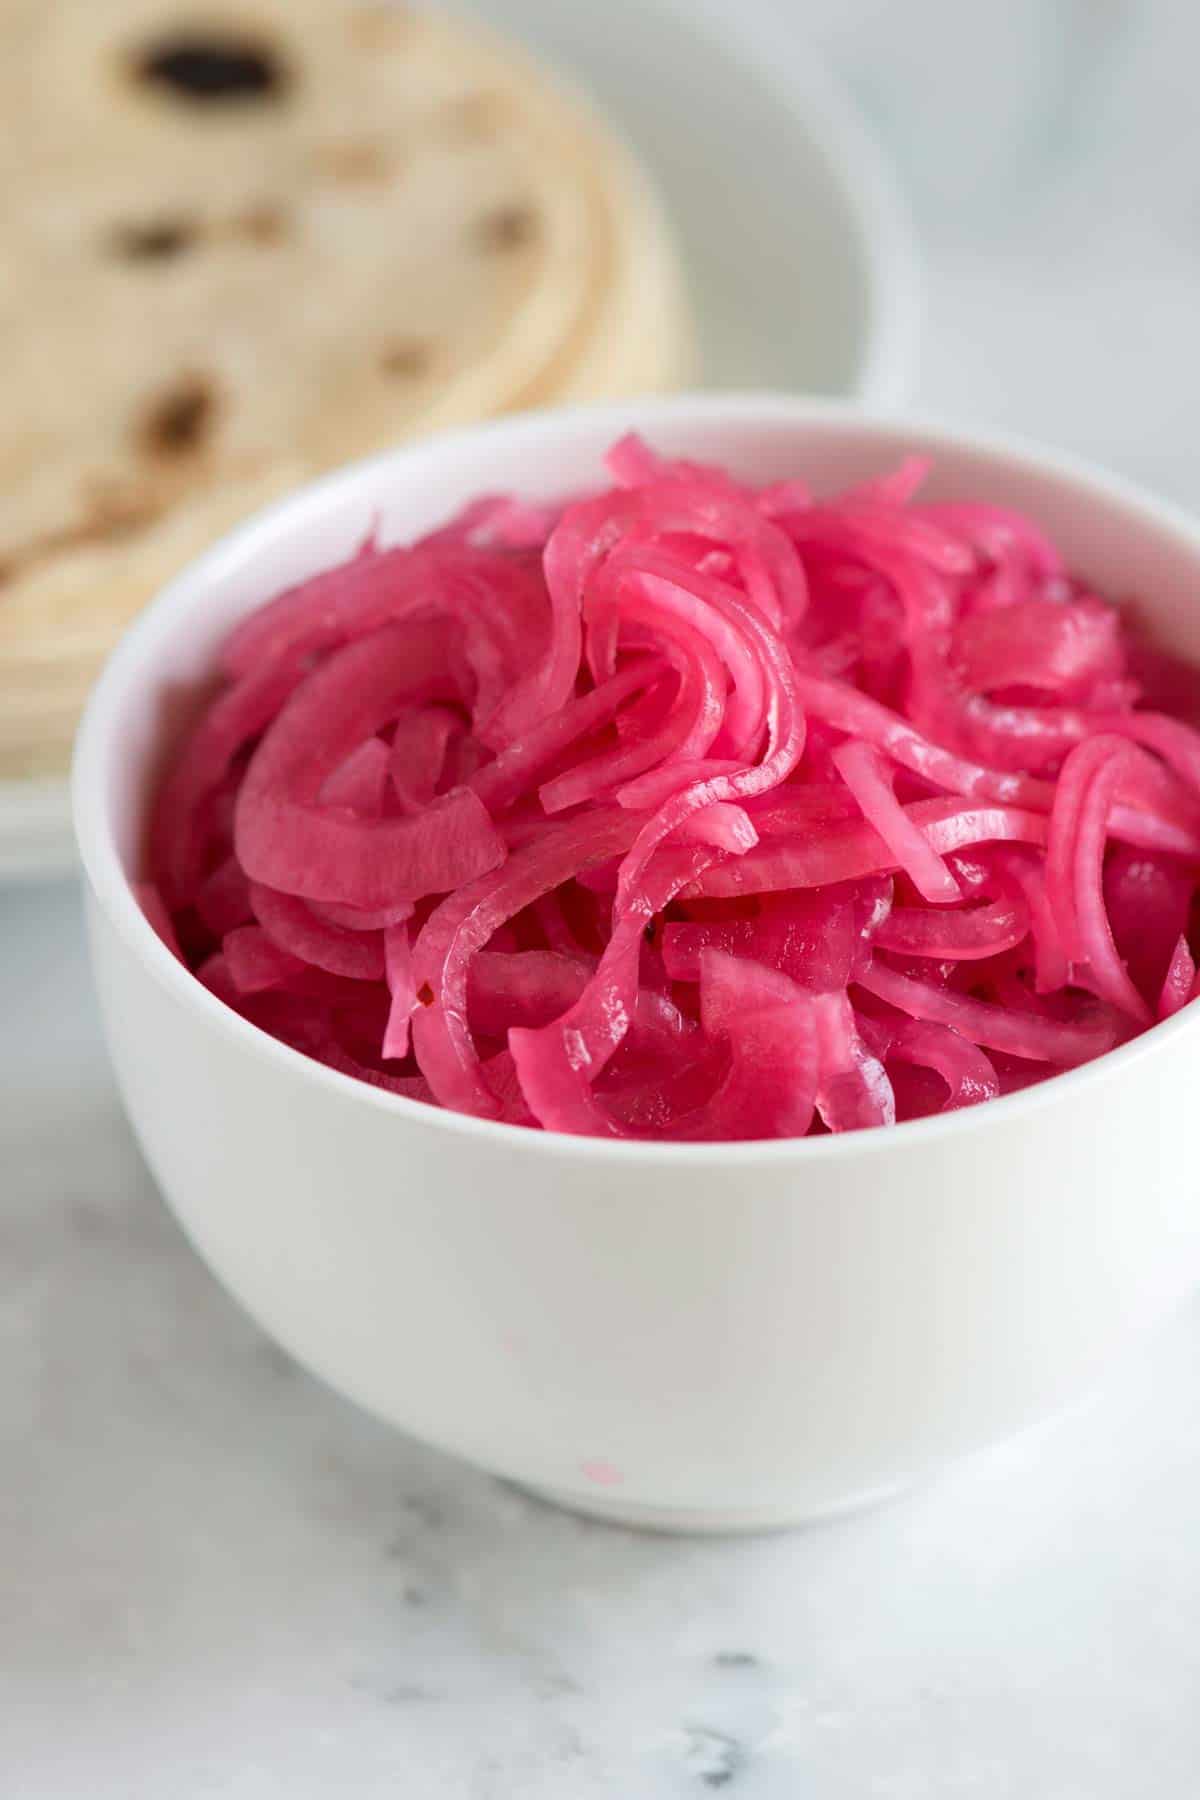 How To Make Quick Pickled Onions